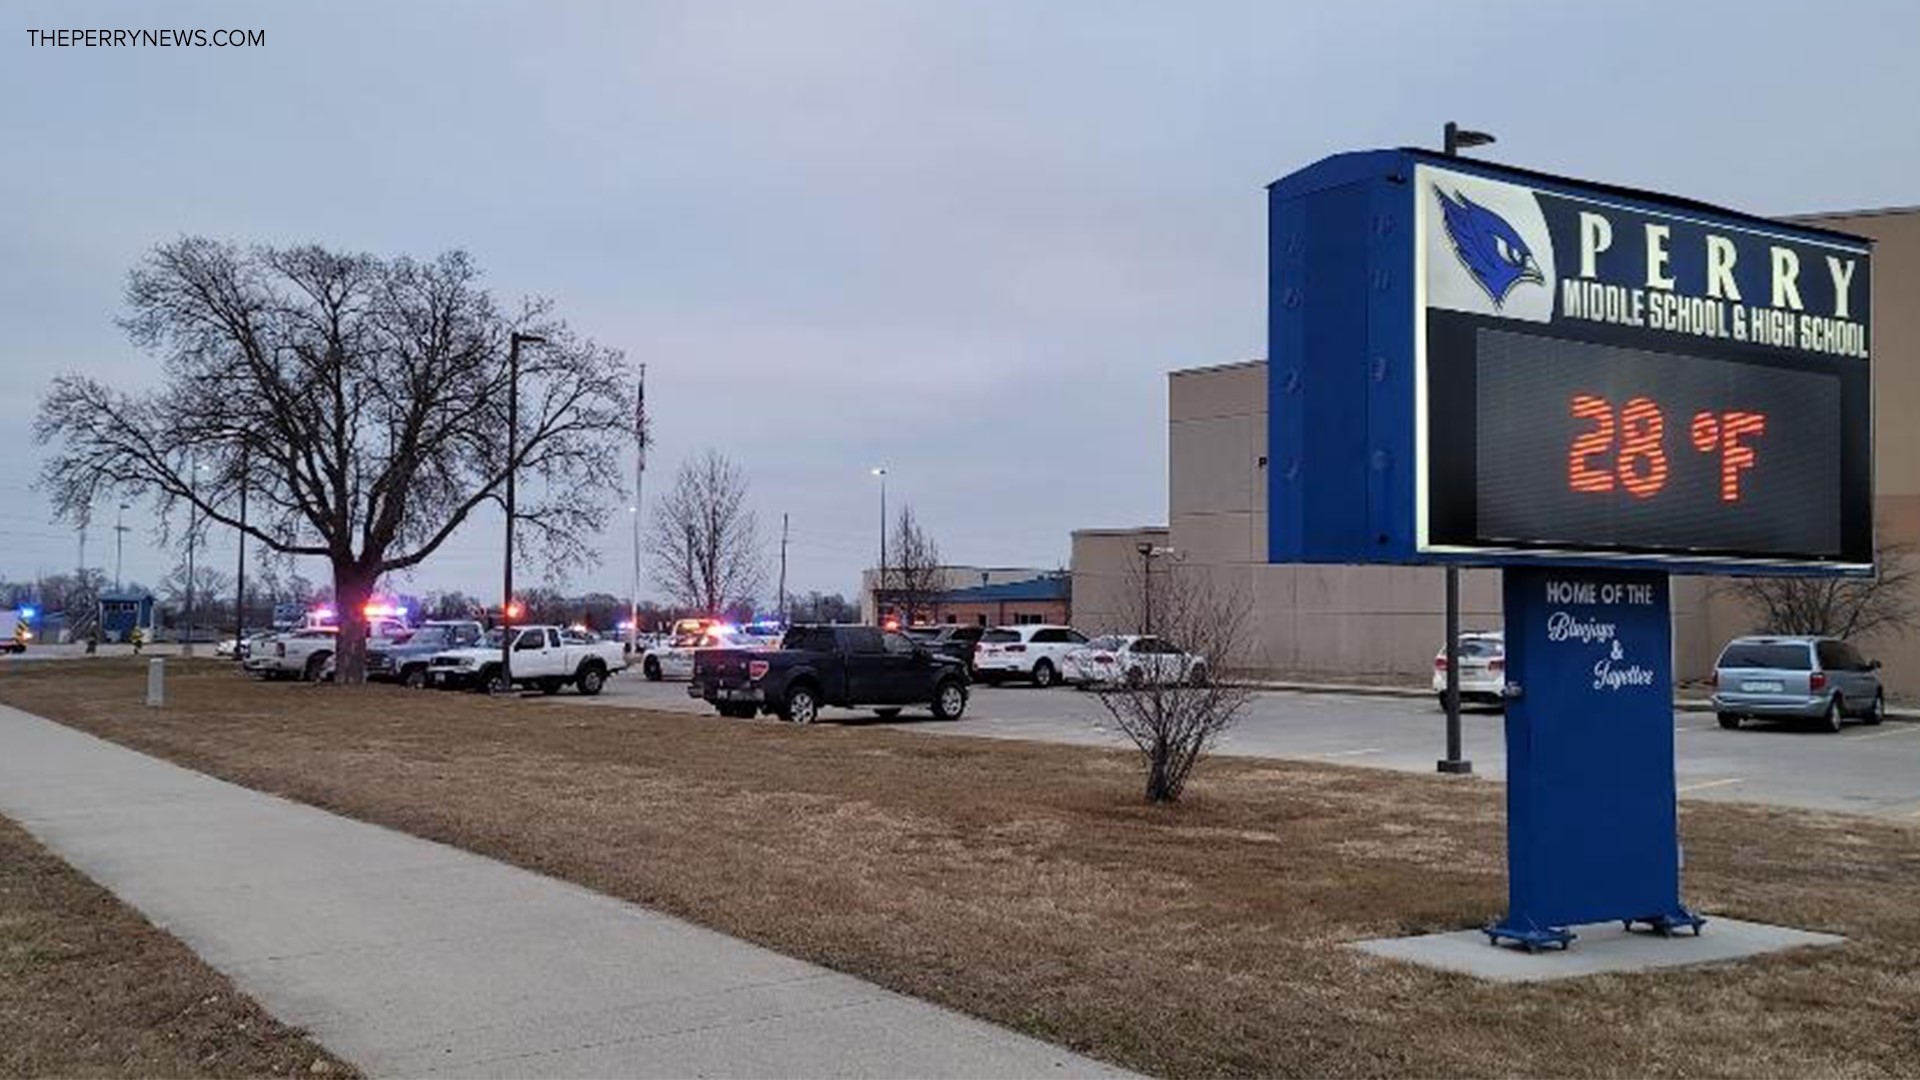 One victim is dead and five are injured after 17-year-old Dylan Butler opened fire at Perry High School on Thursday morning.